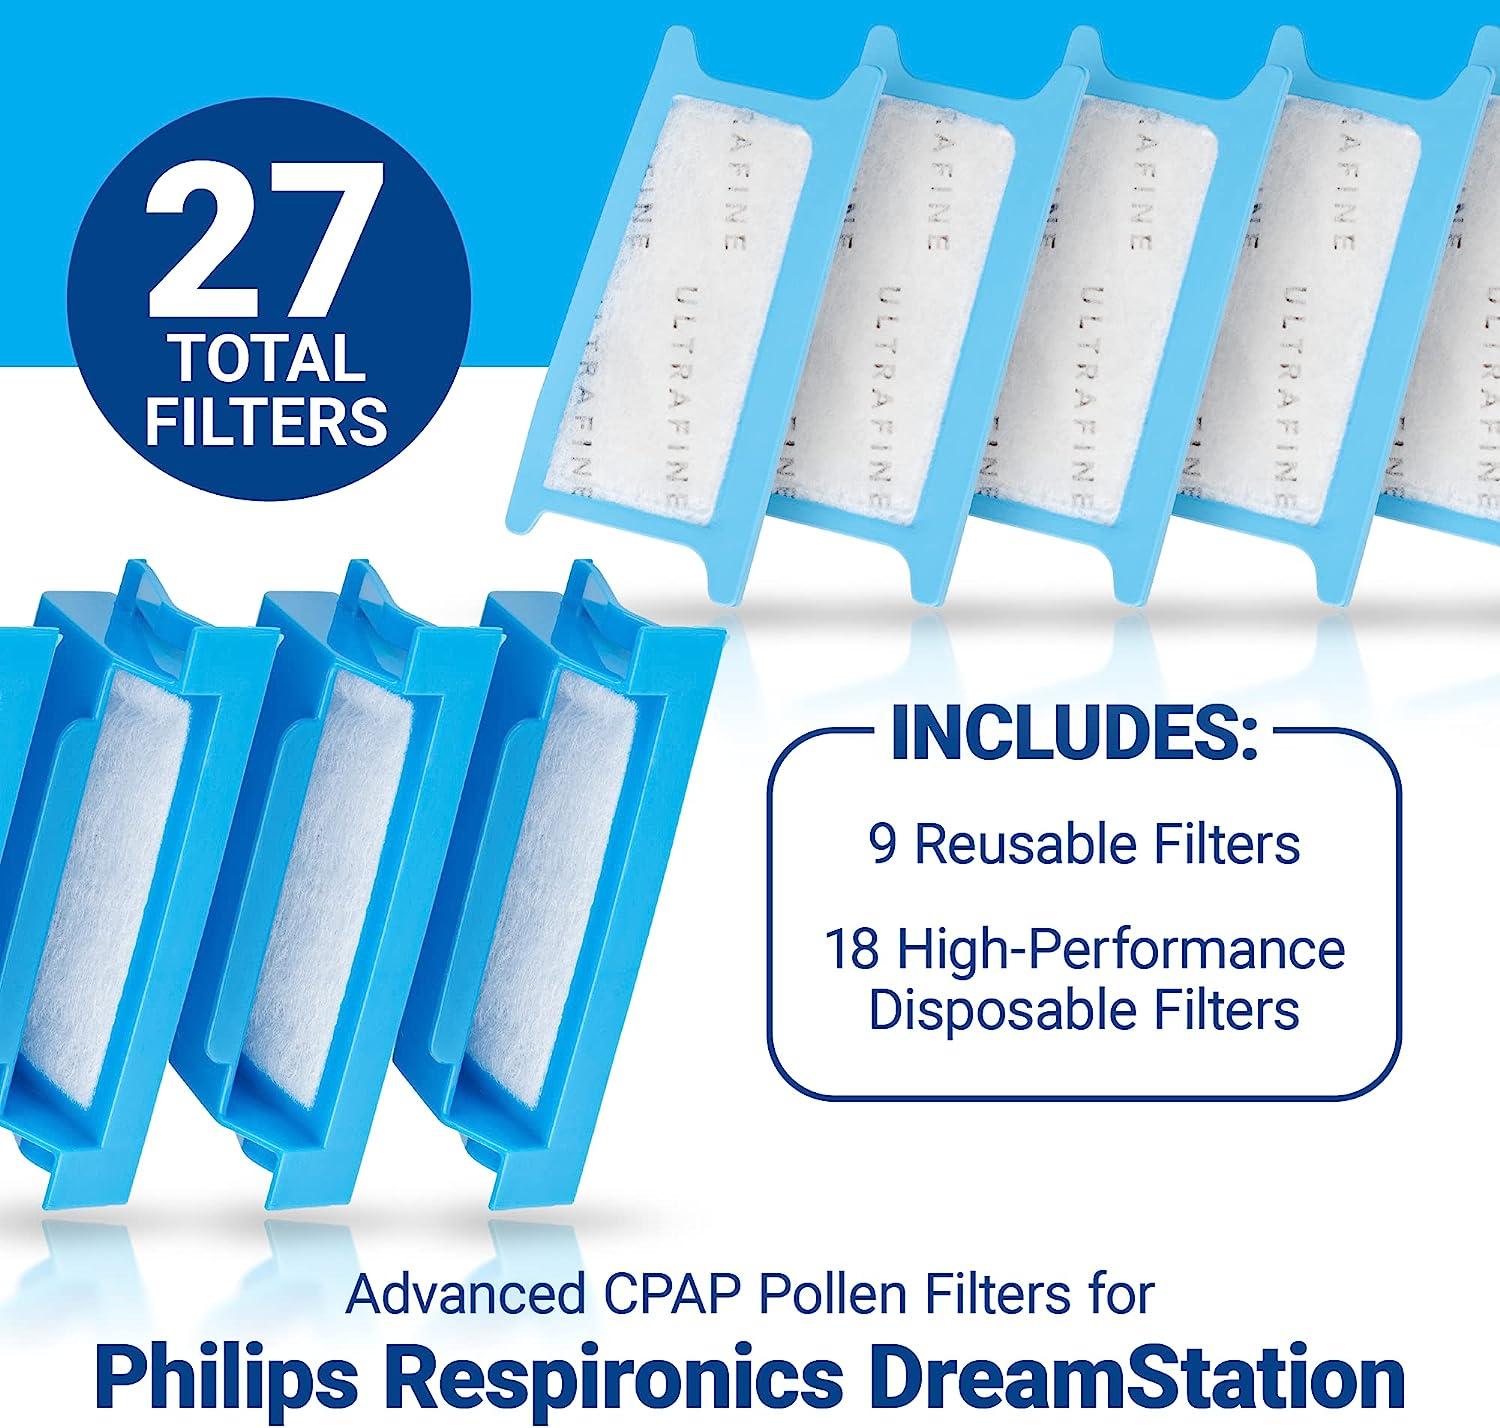 Filtre ultrafin jetable - CPAP Dreamstation Philips - Rmed